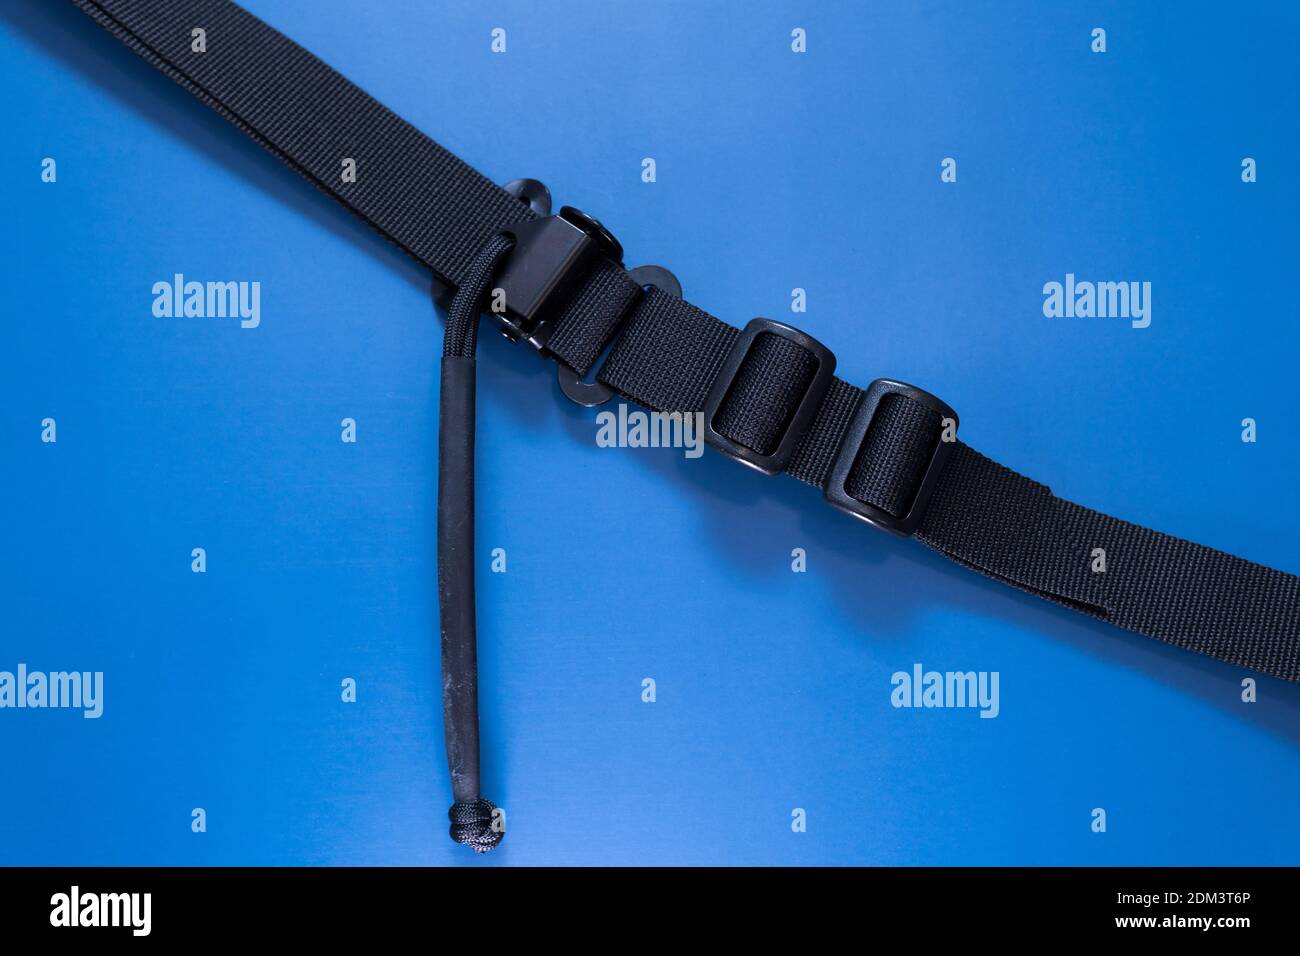 Blue strap High Resolution Stock Photography and Images - Alamy